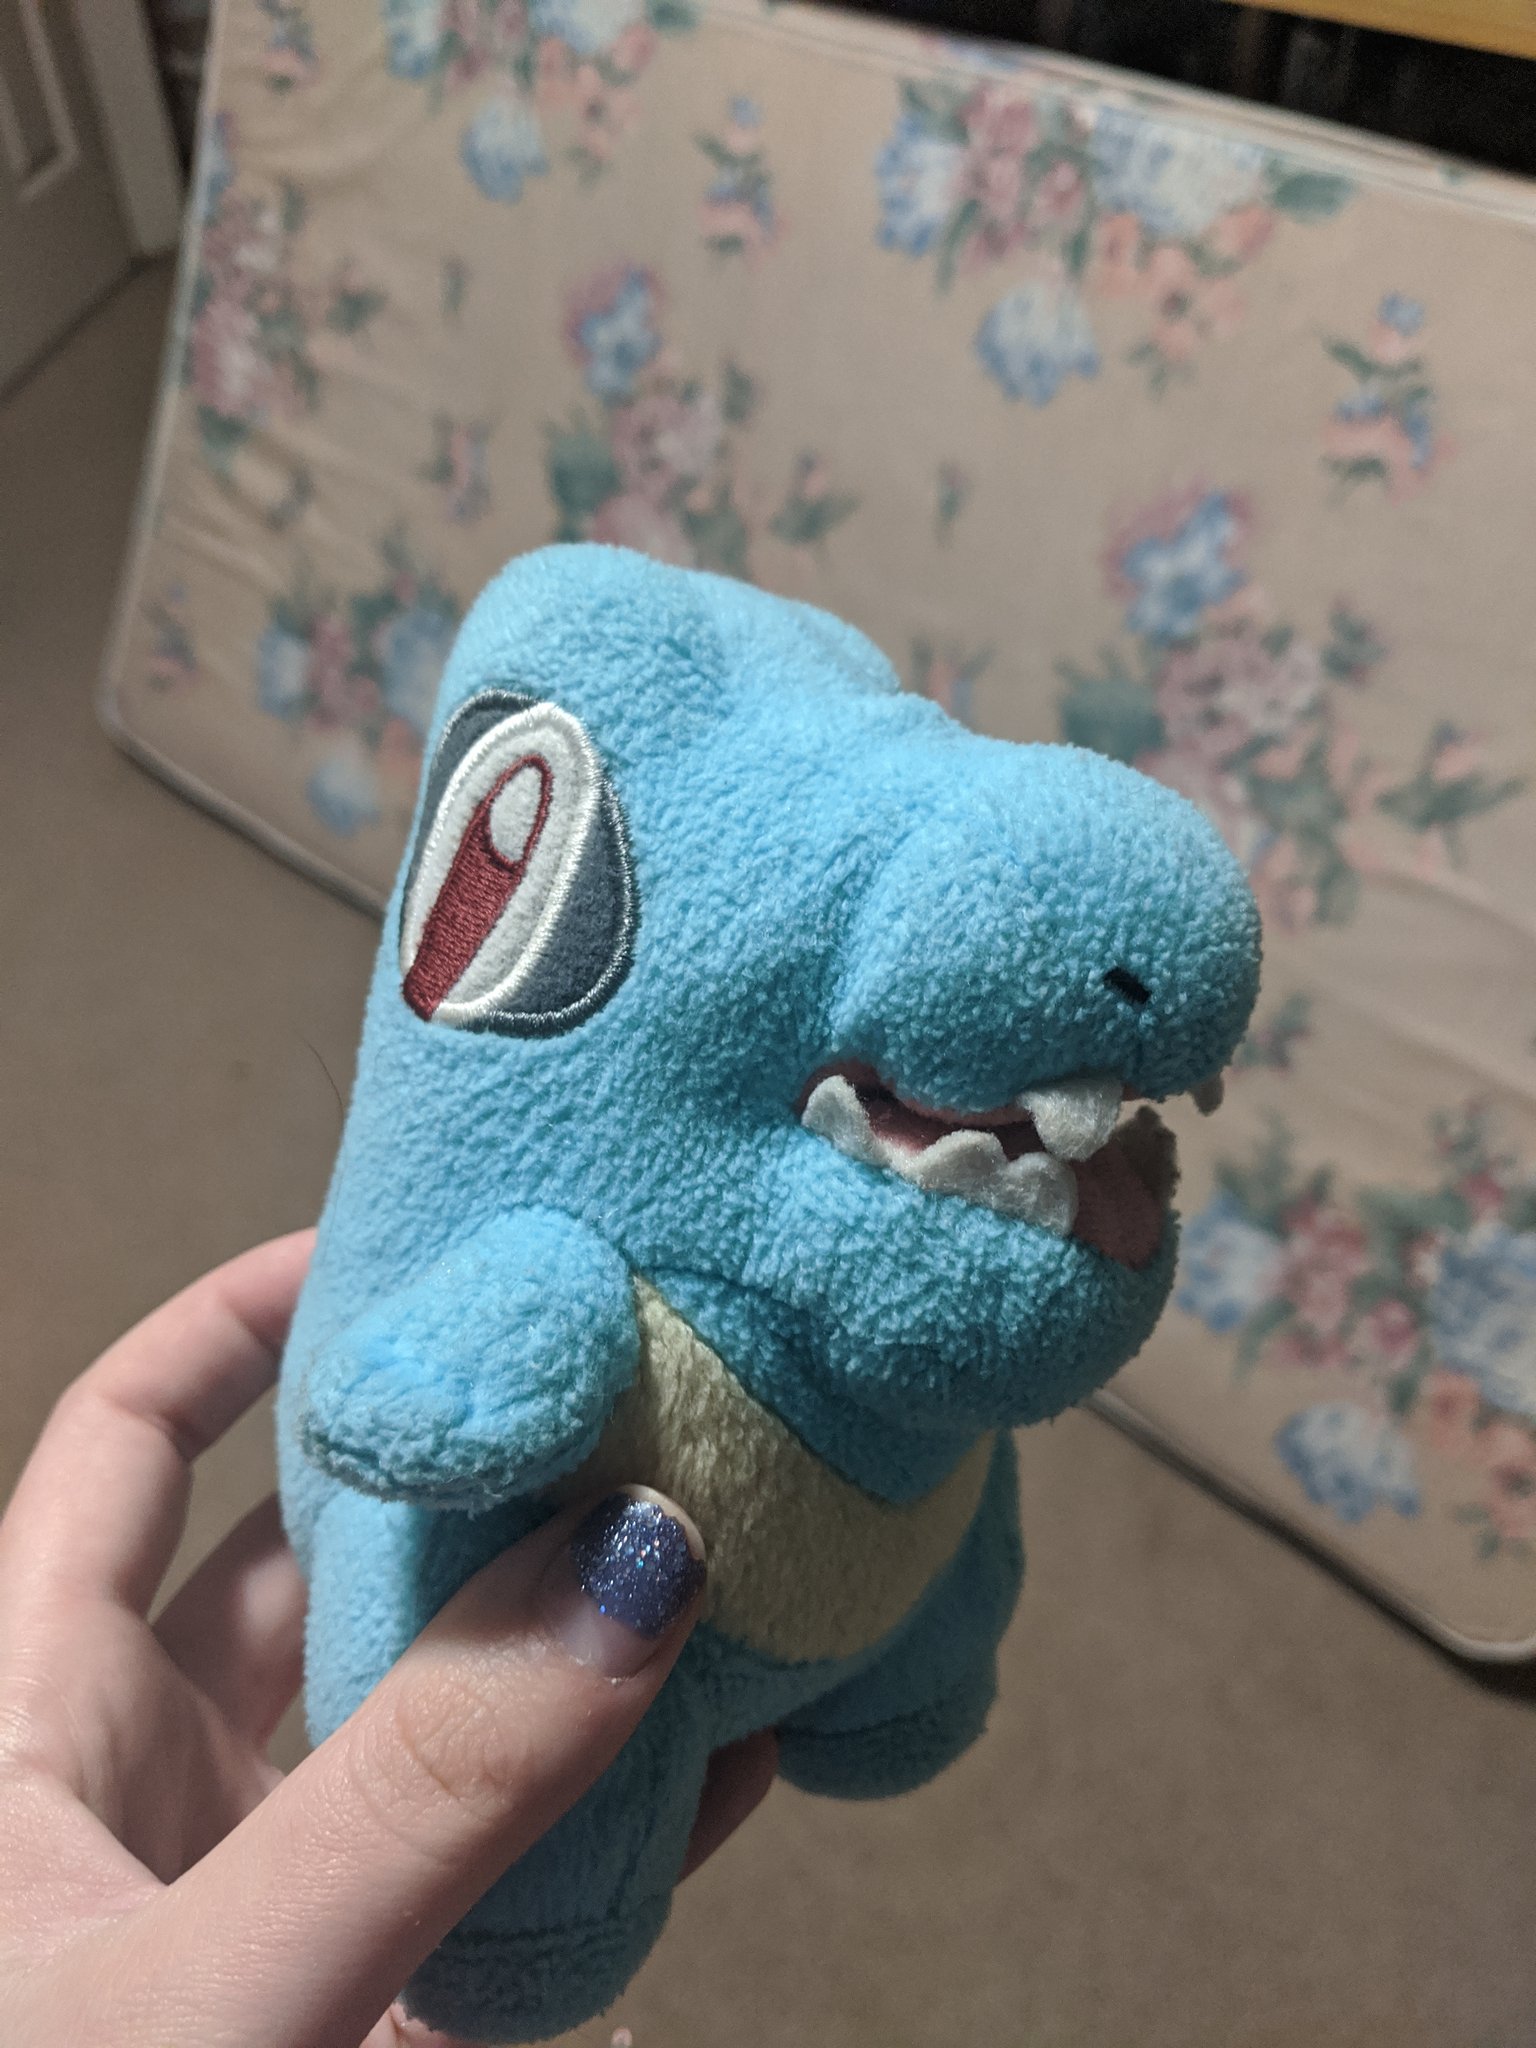 Rosie In Have I Ever Mentioned That I Own The Cursed Totodile Plushie T Co 7tw1u2pu2e Twitter